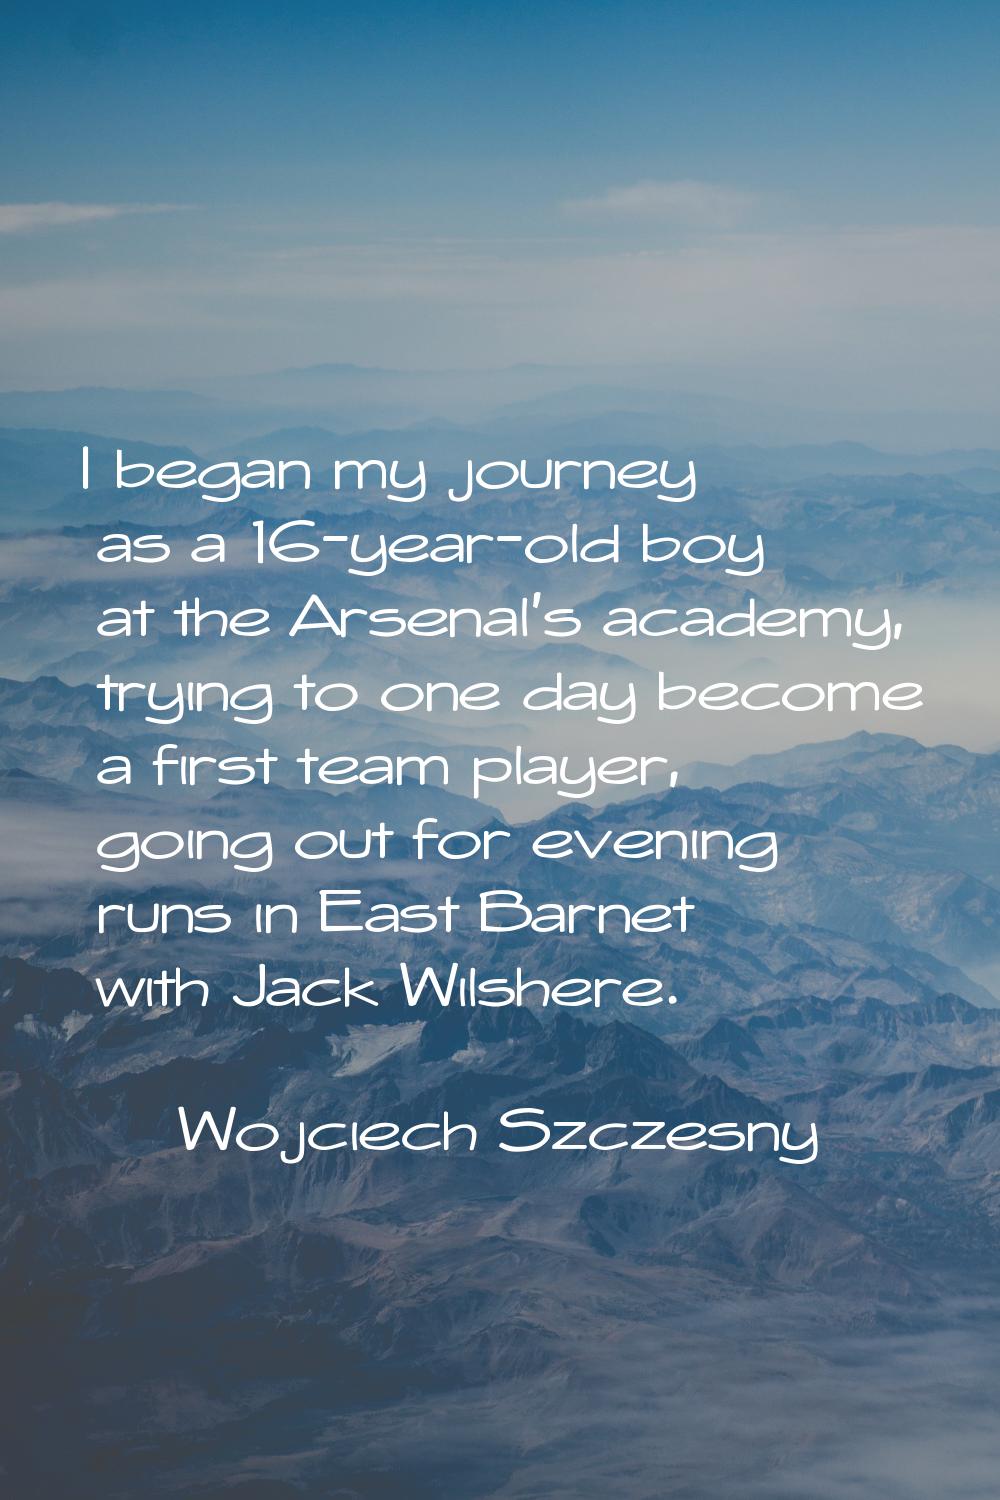 I began my journey as a 16-year-old boy at the Arsenal's academy, trying to one day become a first 